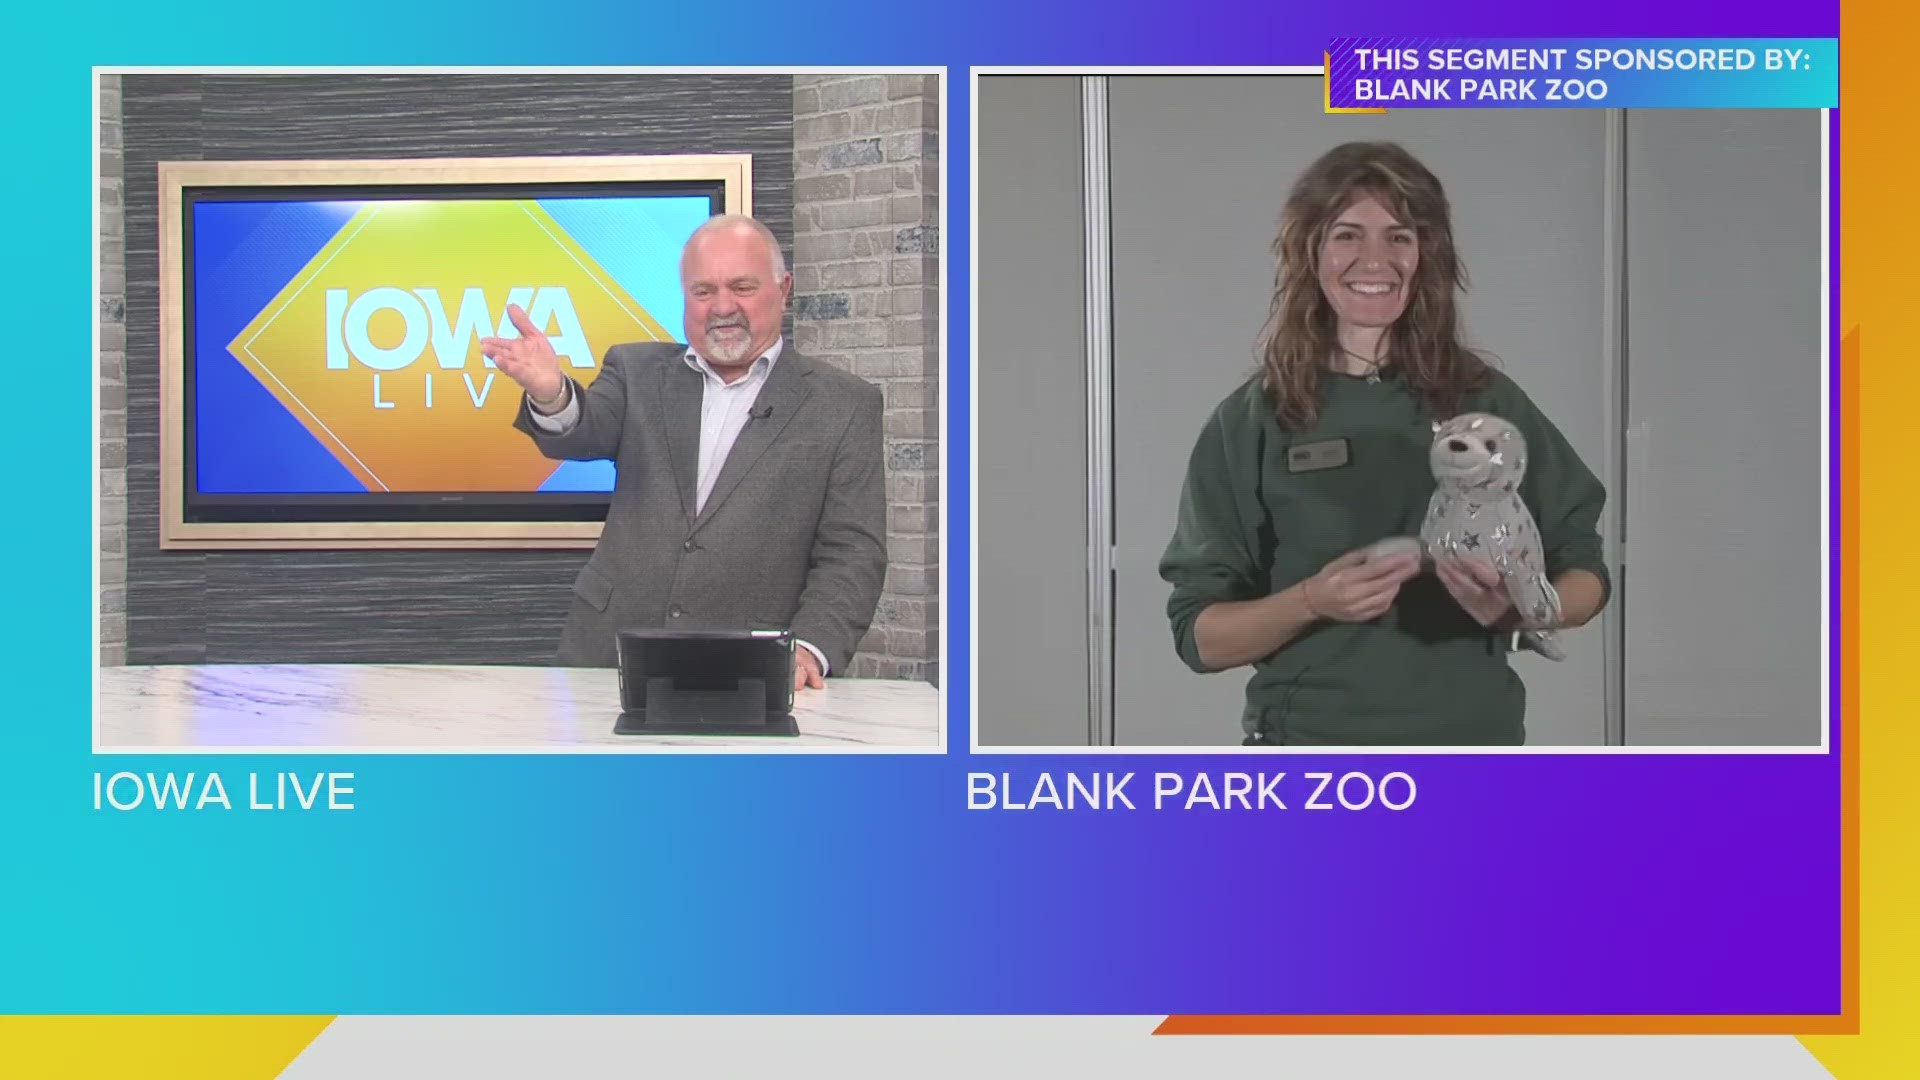 An exciting event coming to the Zoo next month | Paid Content